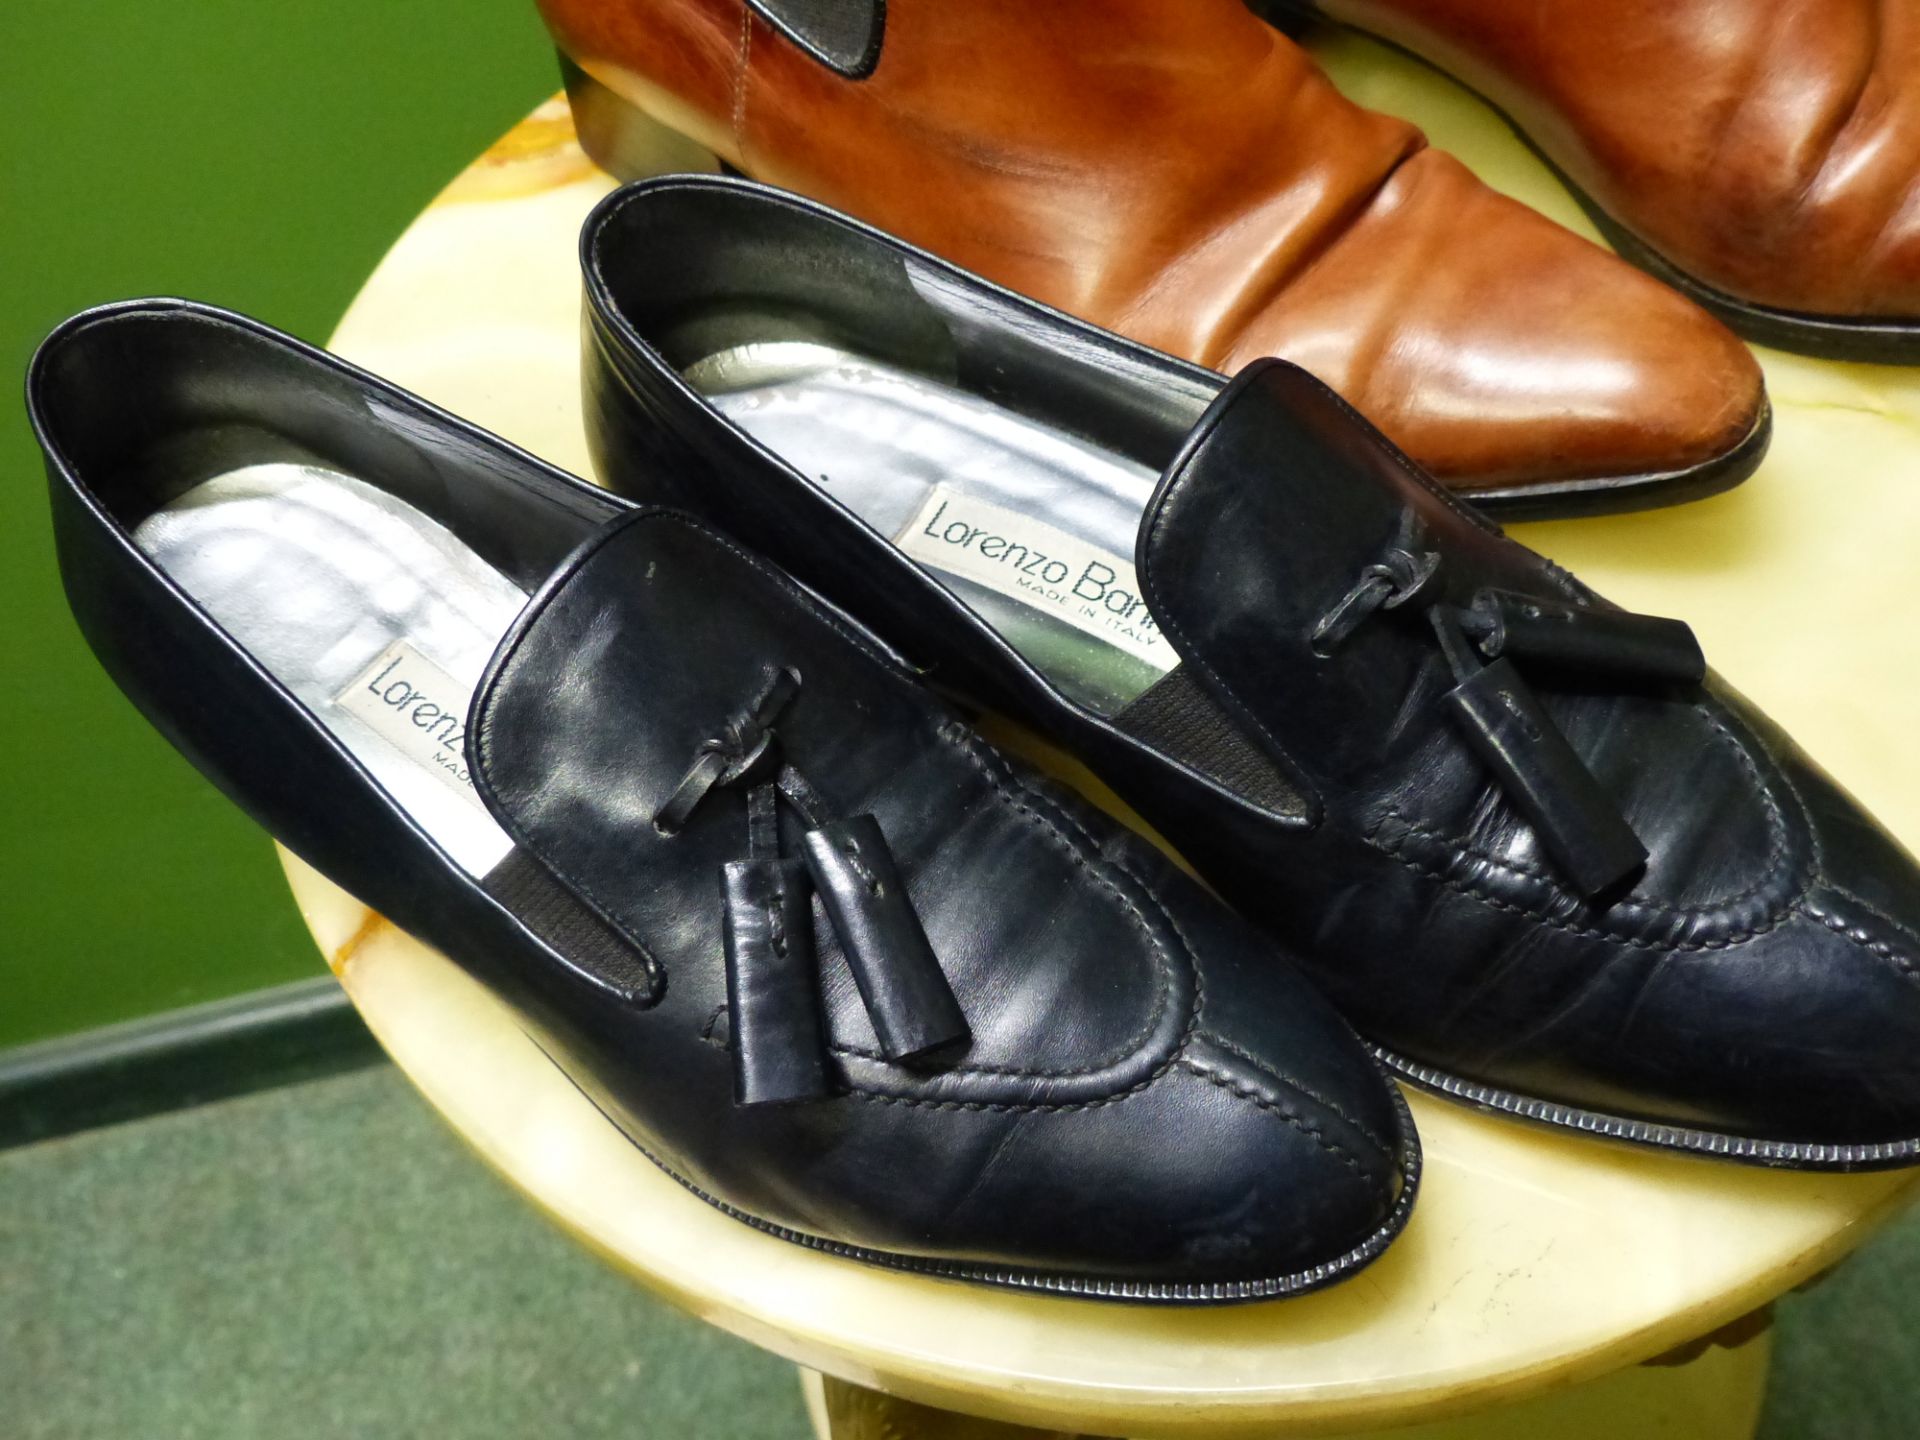 SHOES. LORENZO BANFI ITALY BLACK LEATHER COURT SHOES EUR SIZE 39.5. TOGETHER WITH BROWN BOOTS SIZE - Image 2 of 10